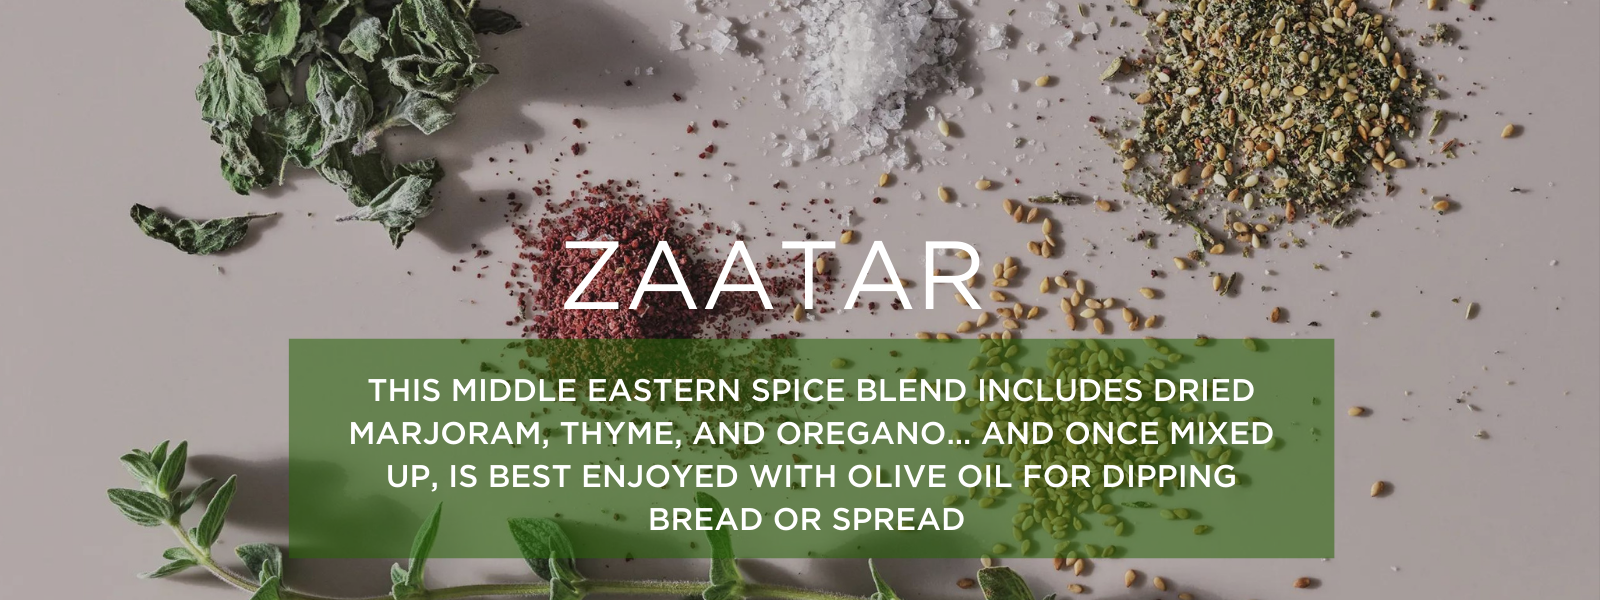 Zaatar- Health Benefits, Uses and Important Facts - PotsandPans India